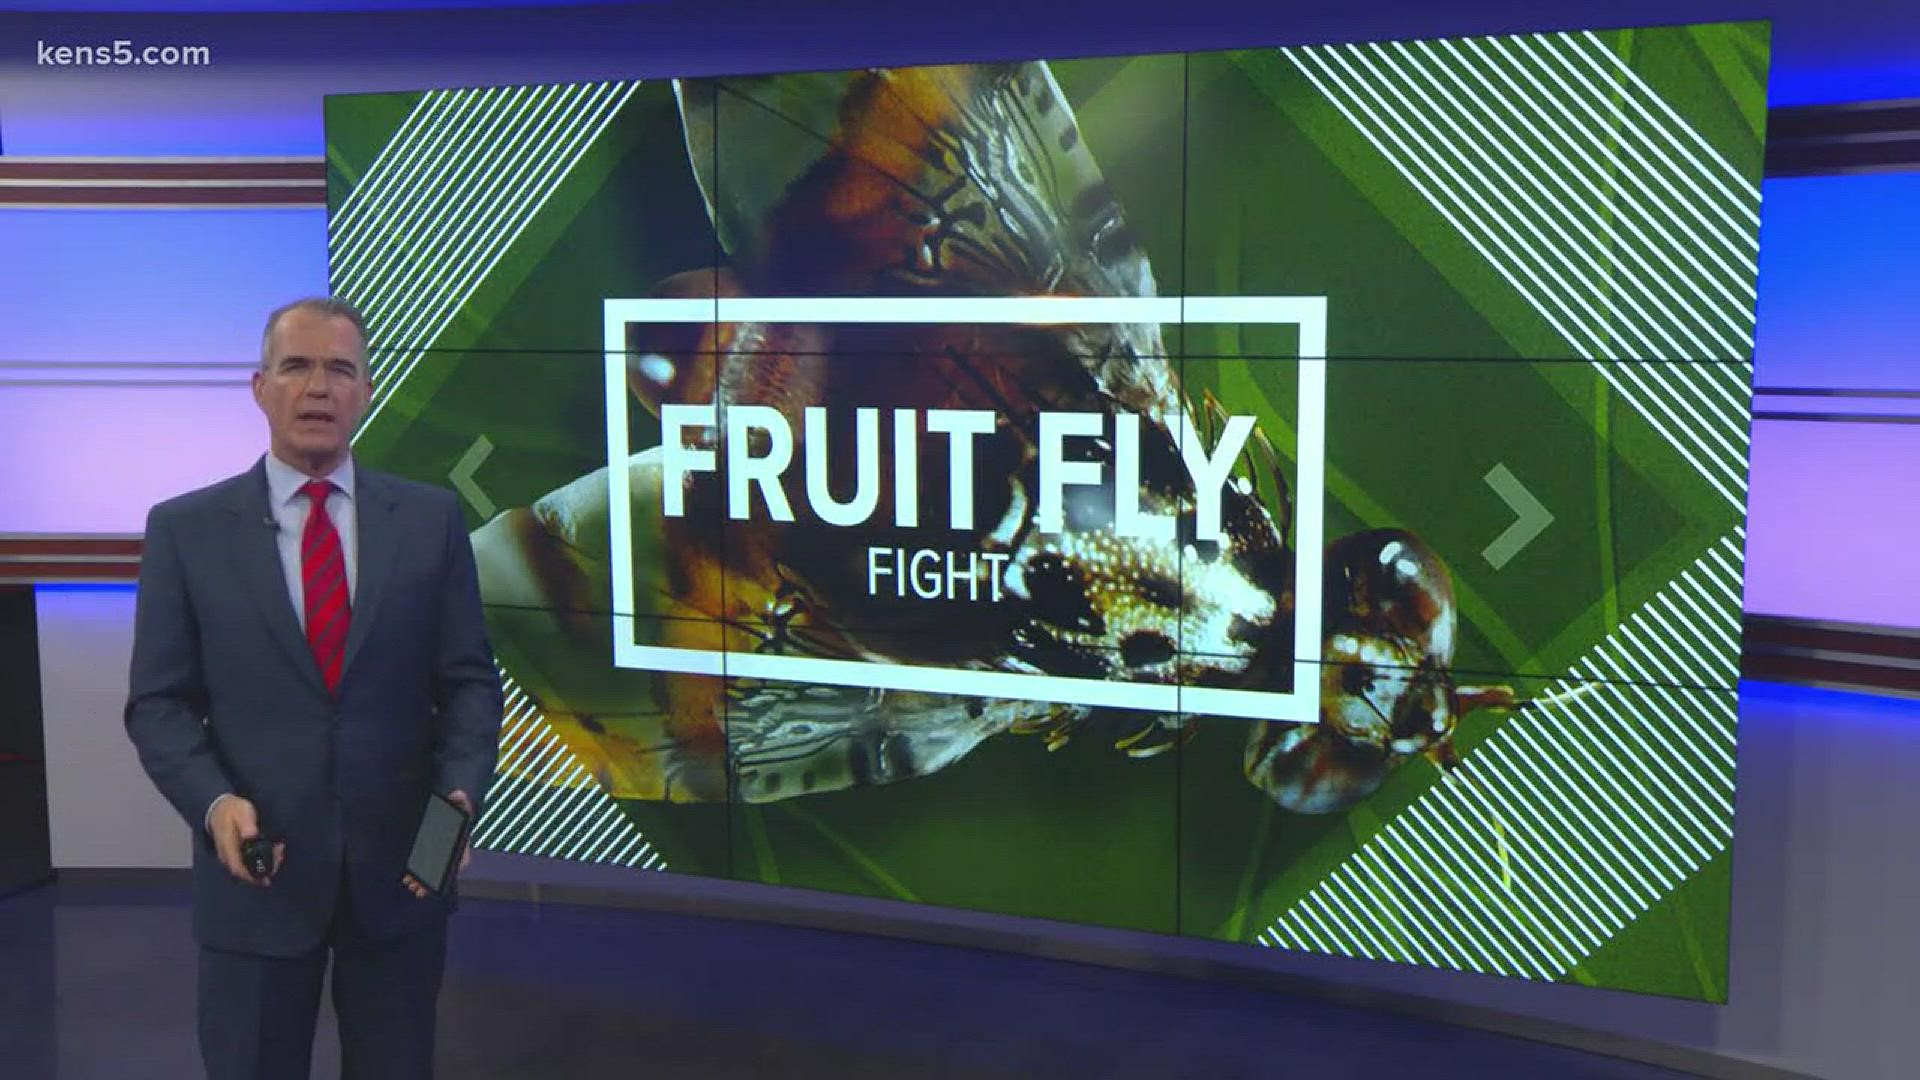 The Mexican fruit fly is threatening to cause $1.5 billion in damage to the citrus growers of the Rio Grande Valley.